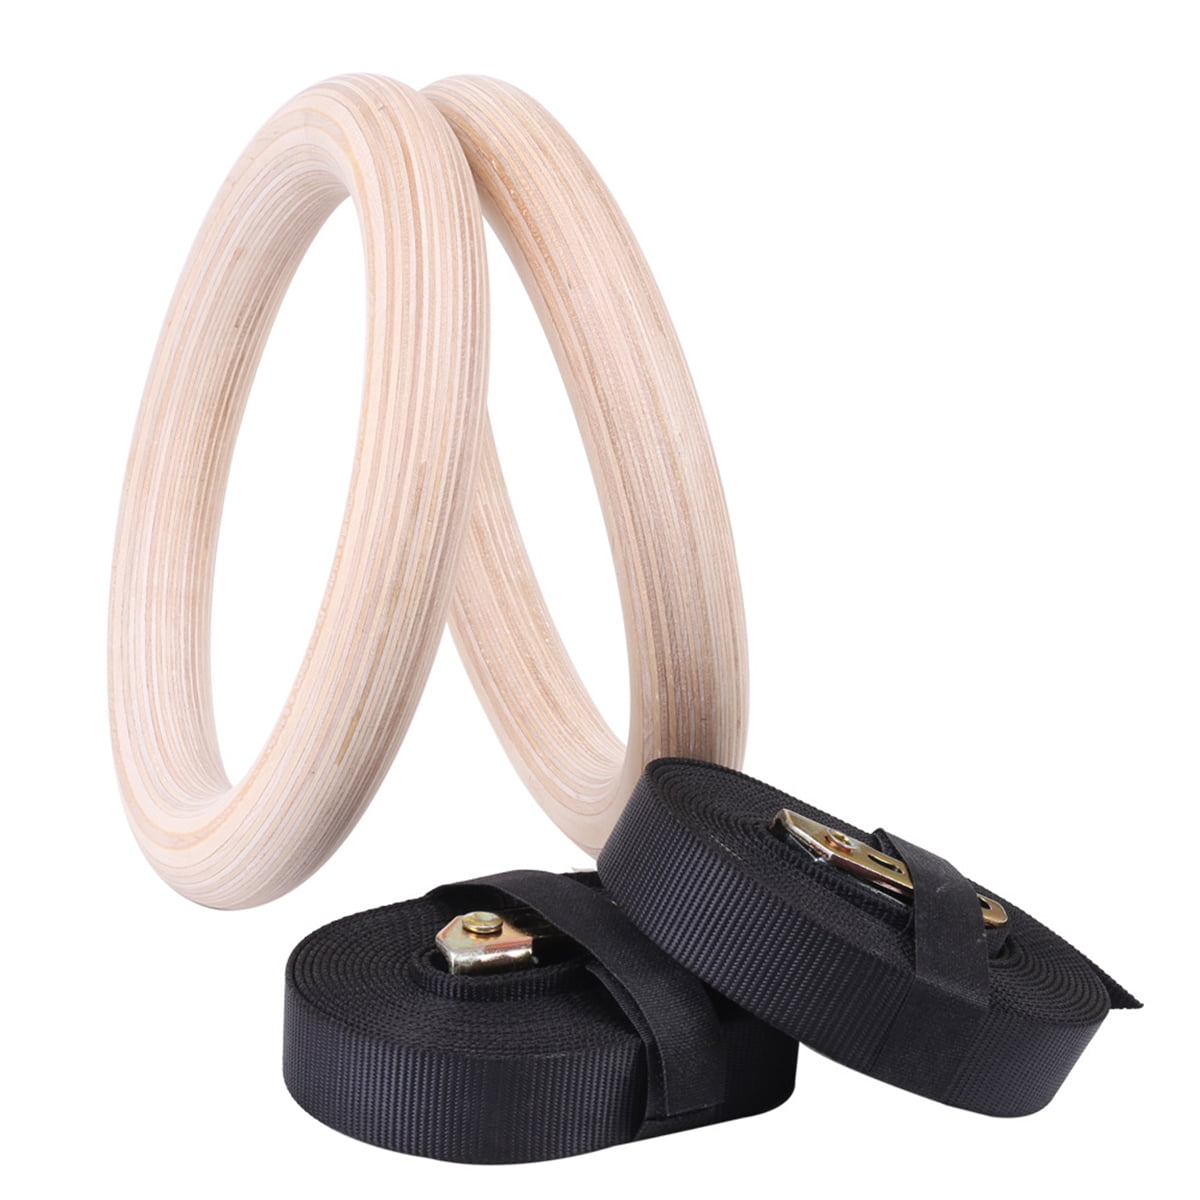 28mm Home Wood Gymnastic Rings Gym Cross Fitness Adjustable Long Buckles Straps